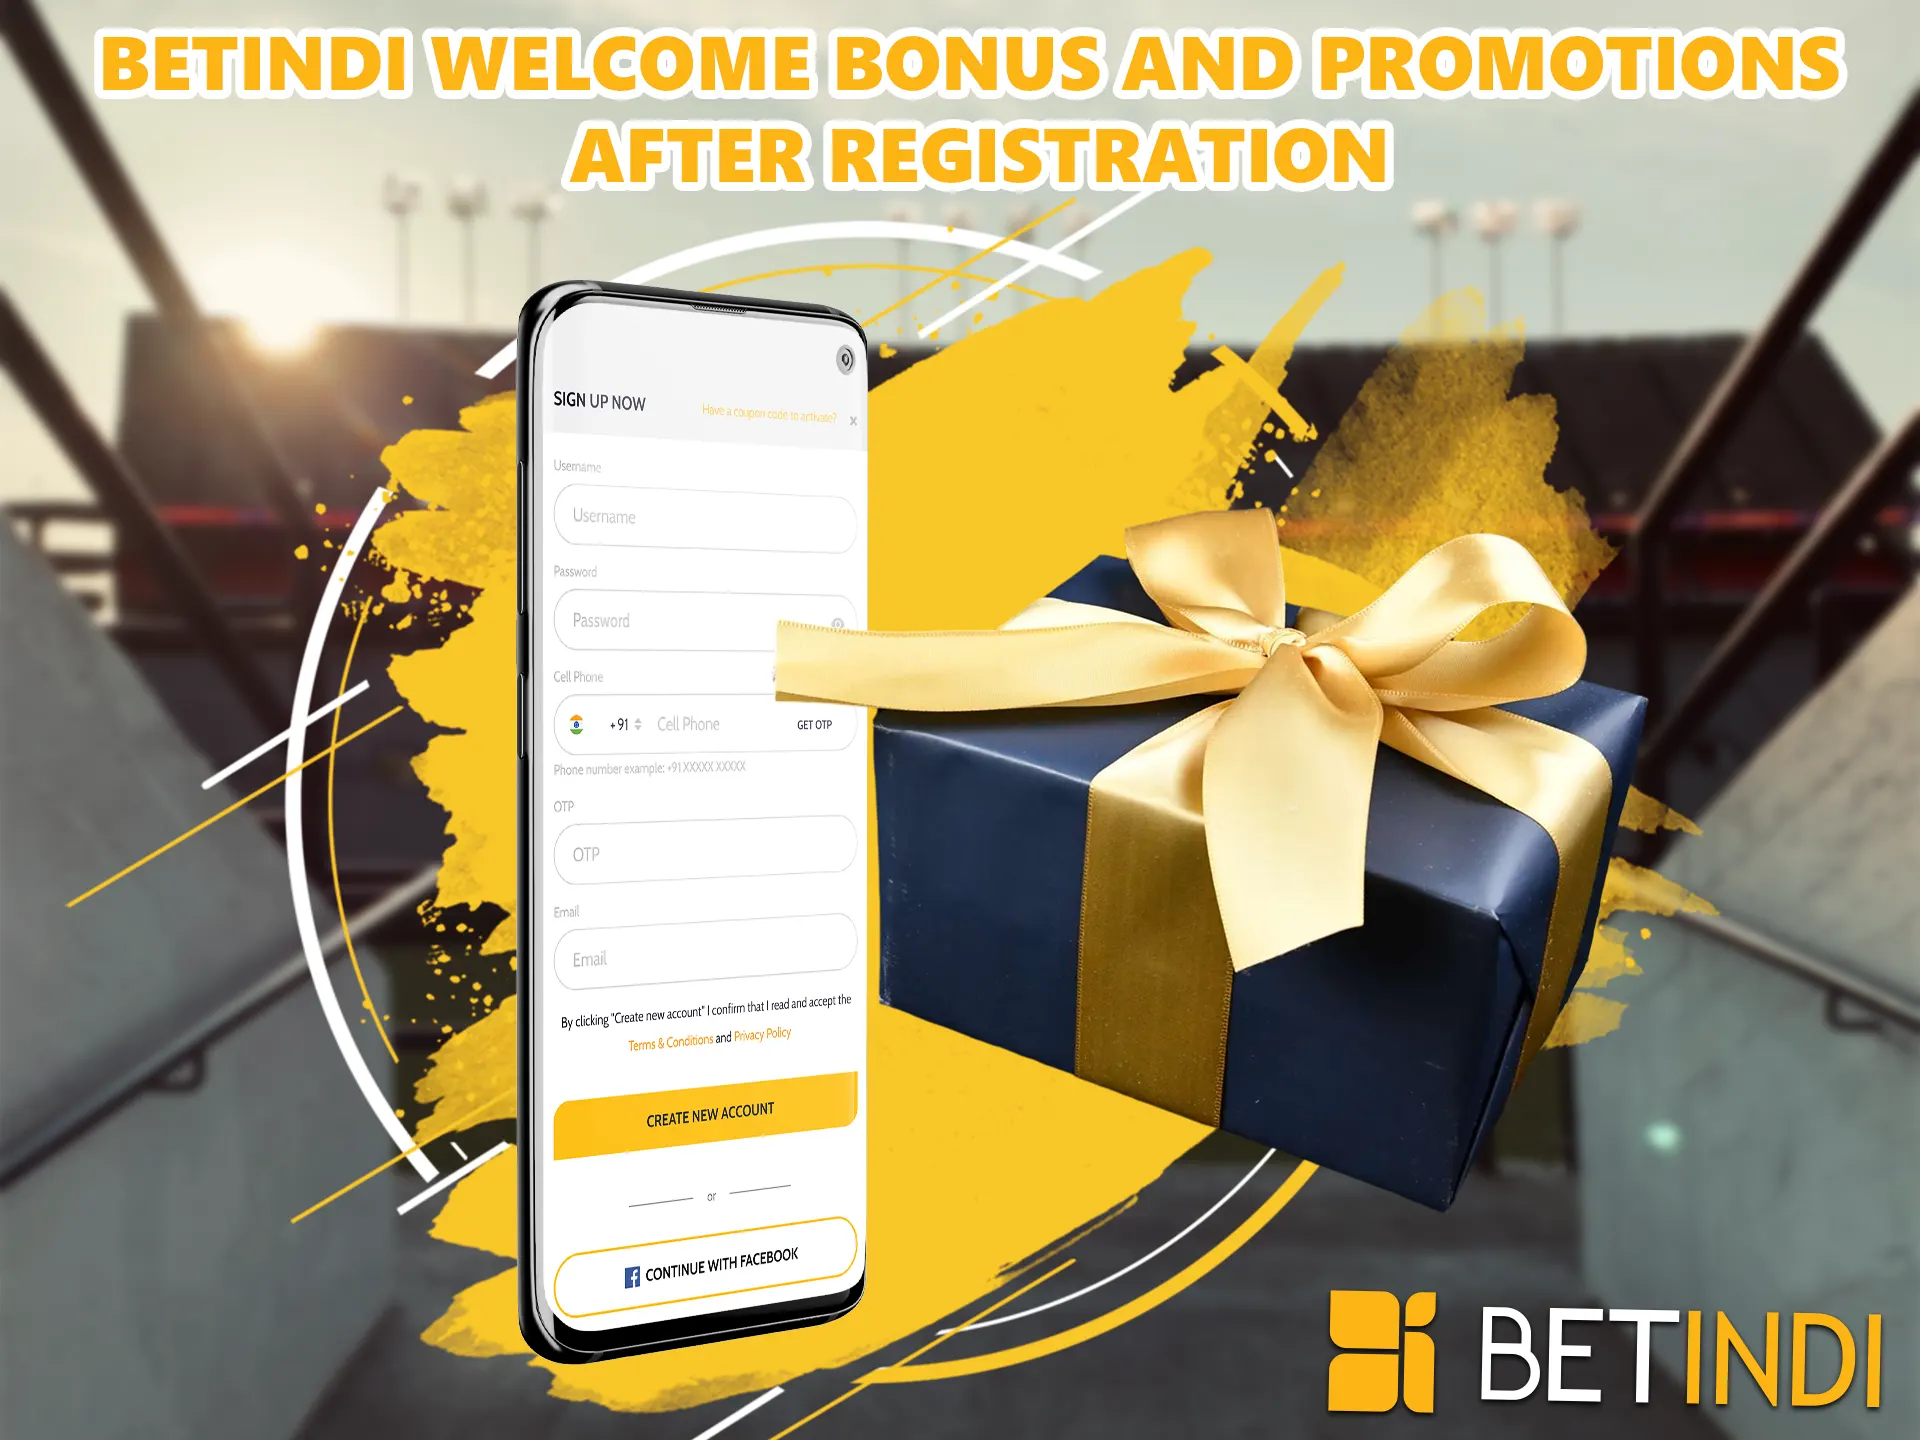 After registering, each user is waiting for a nice cash gift from BetIndi betting site, you can double the amount of your first deposit up to 10000 INR.